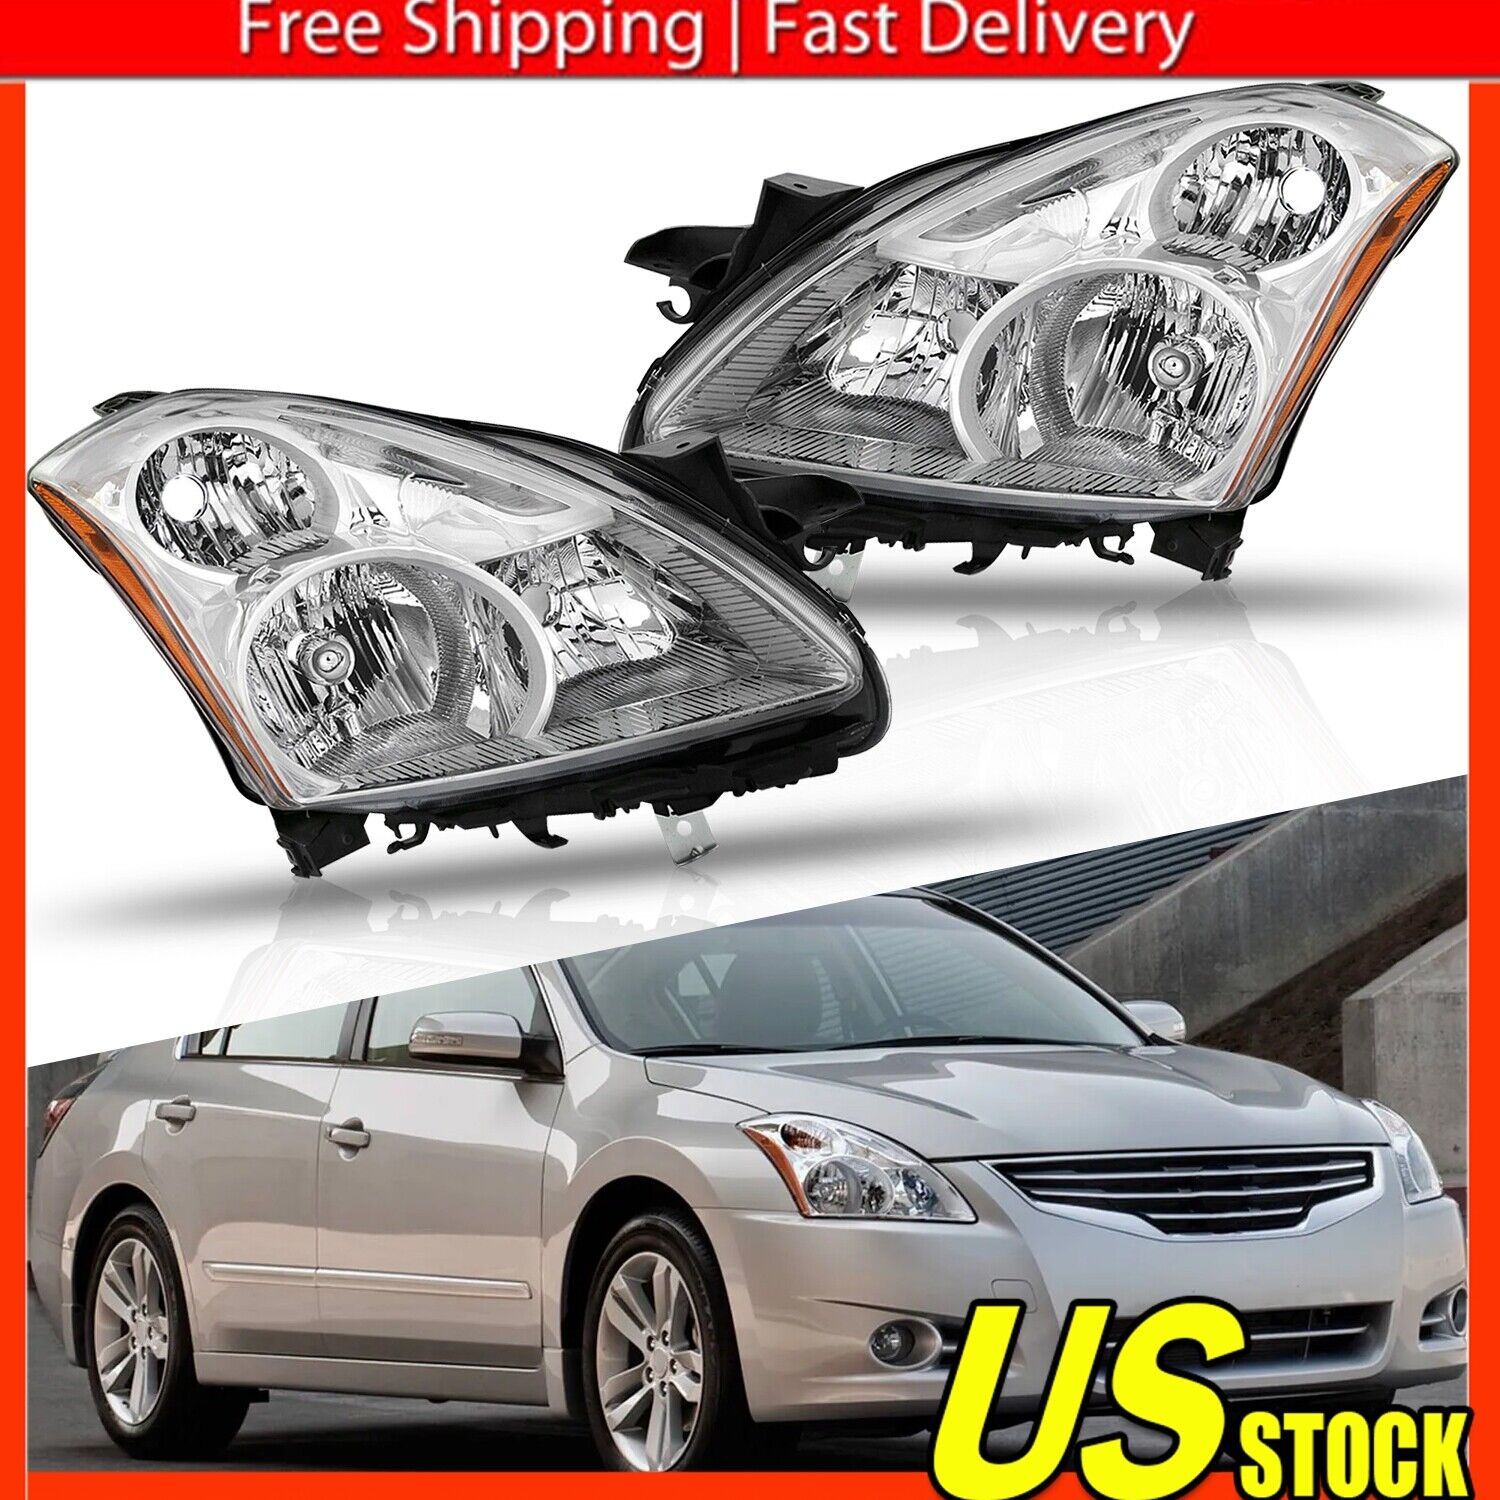 Fits 2010-2012 Altima 4Dr Sedan Clear Headlights Driving Lamps Left + Right Pair